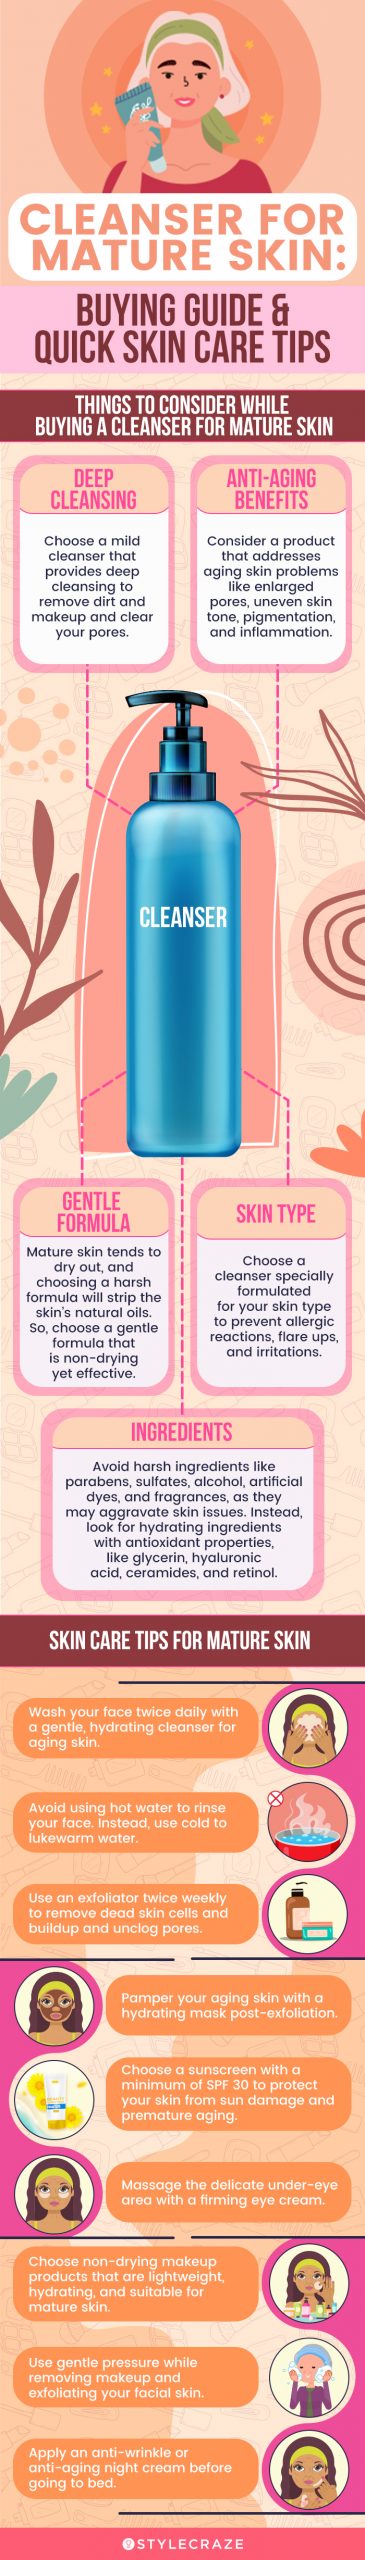 Cleanser For Mature Skin: Buying Guide [infographic]